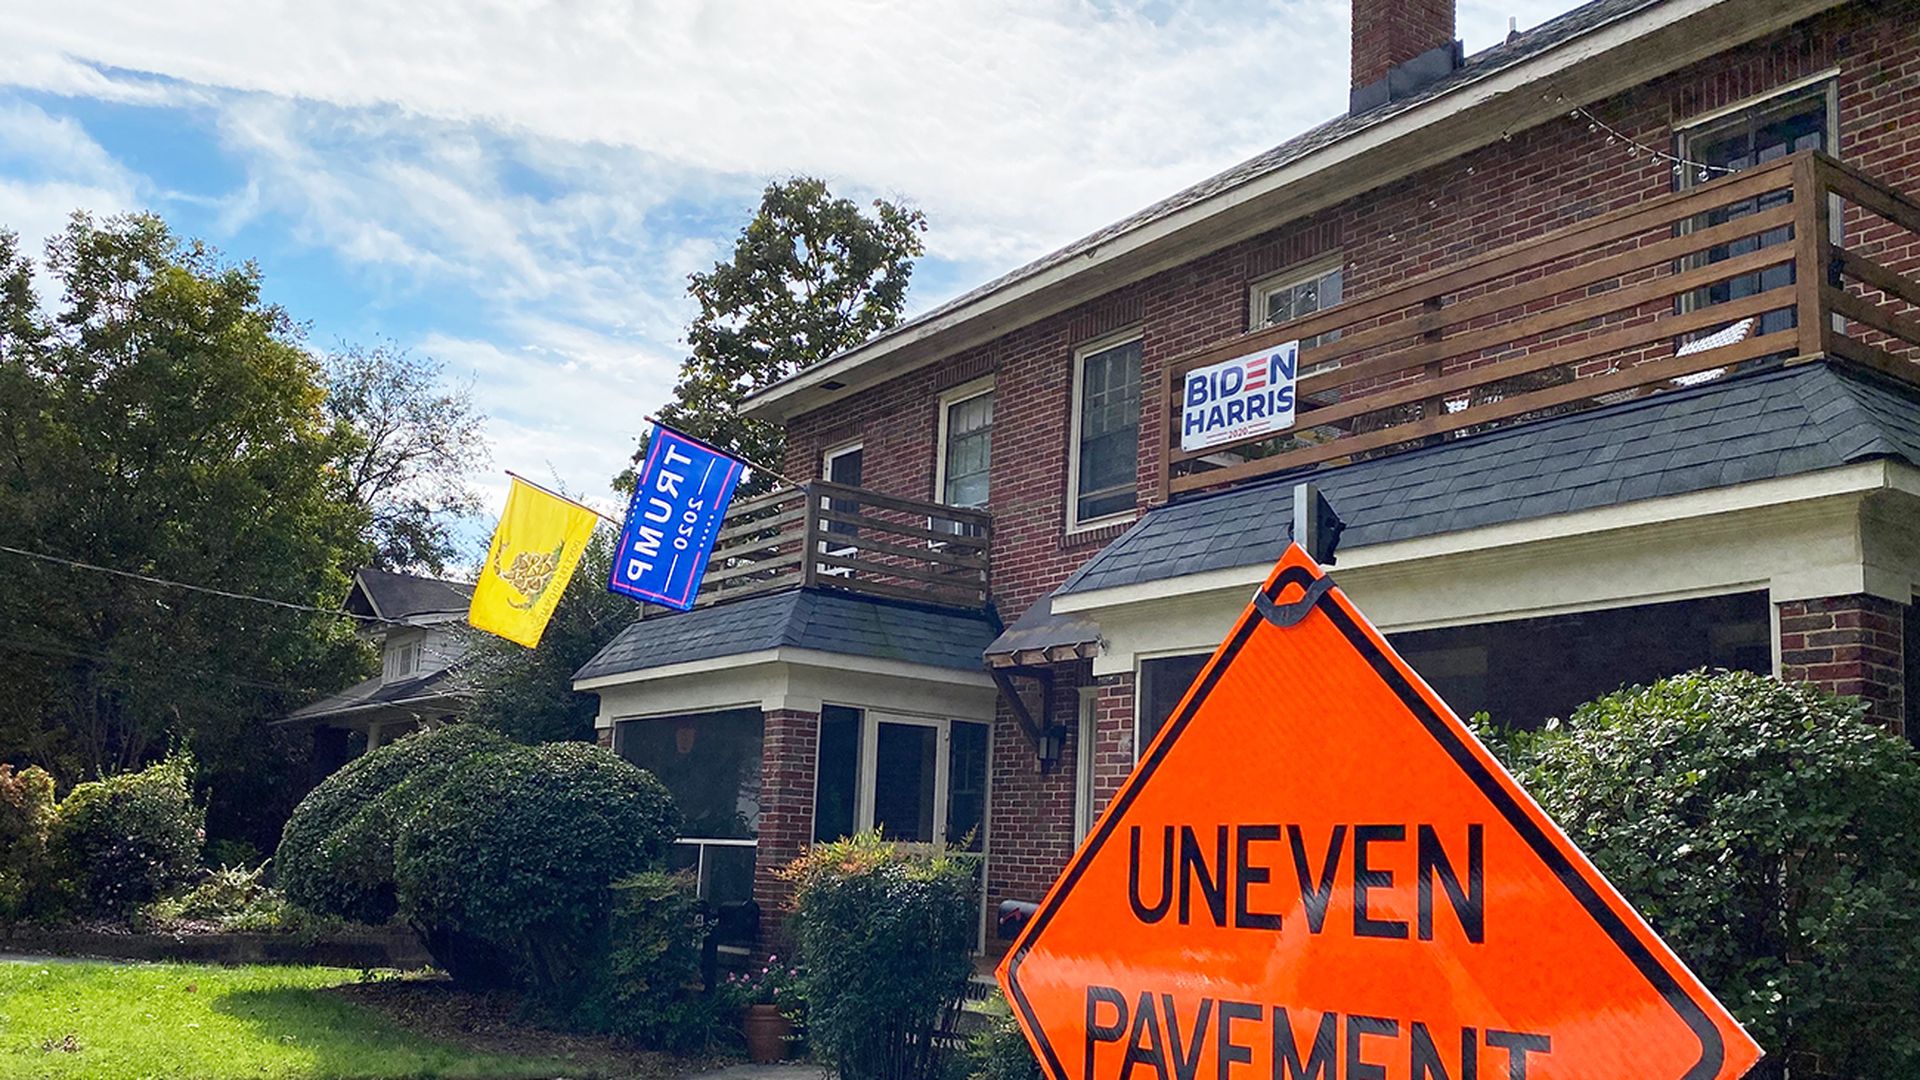 House in Elizabeth with Biden and Trump signs